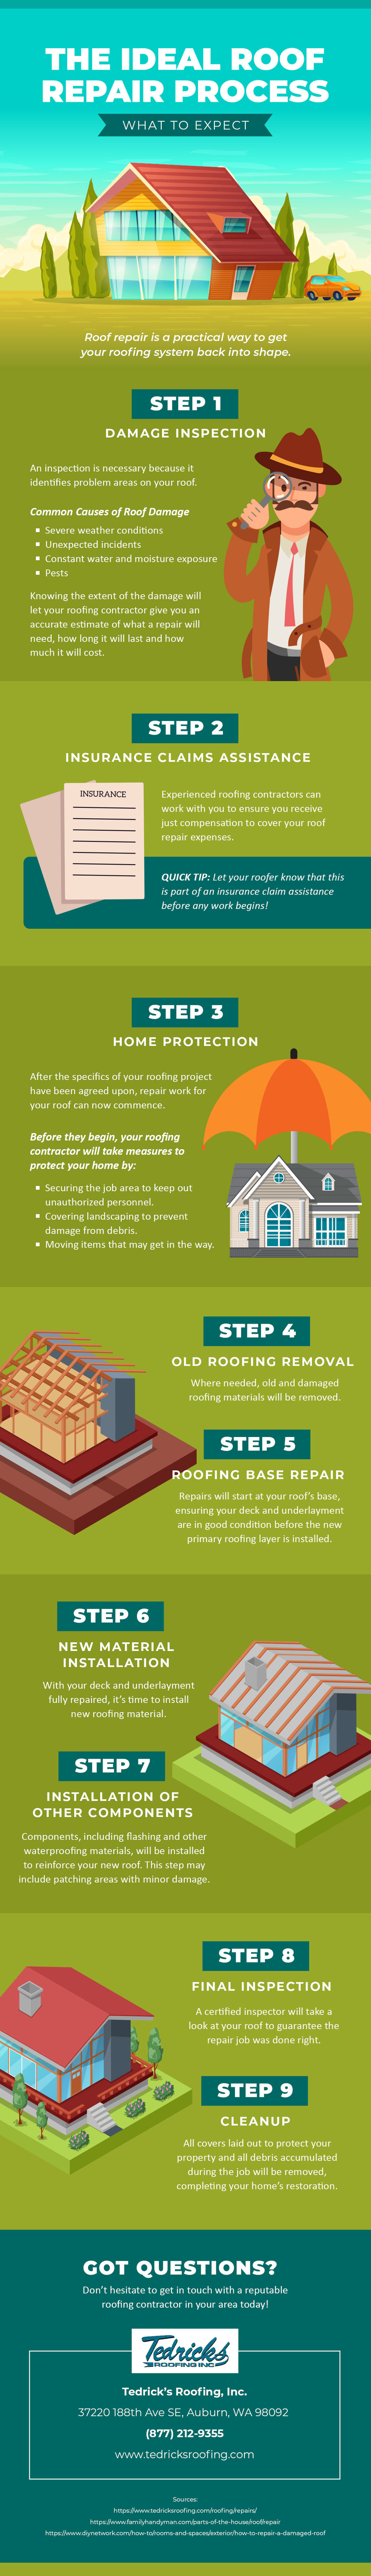 [infographic] The Ideal Roof Repair Process: What To Expect